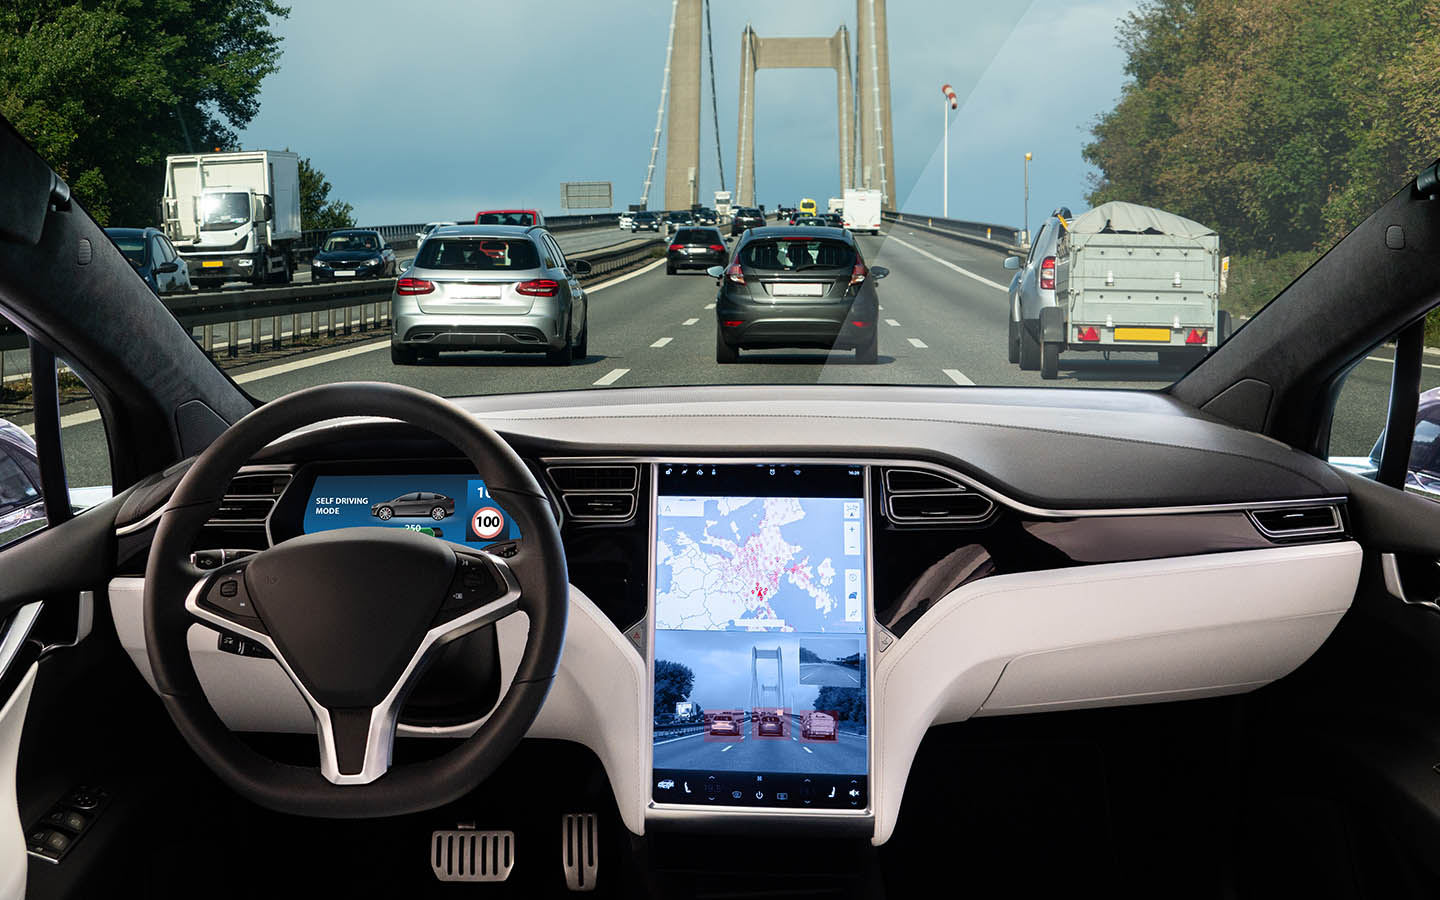 Tesla Autopilot is a combination of advanced tech and artificial technology